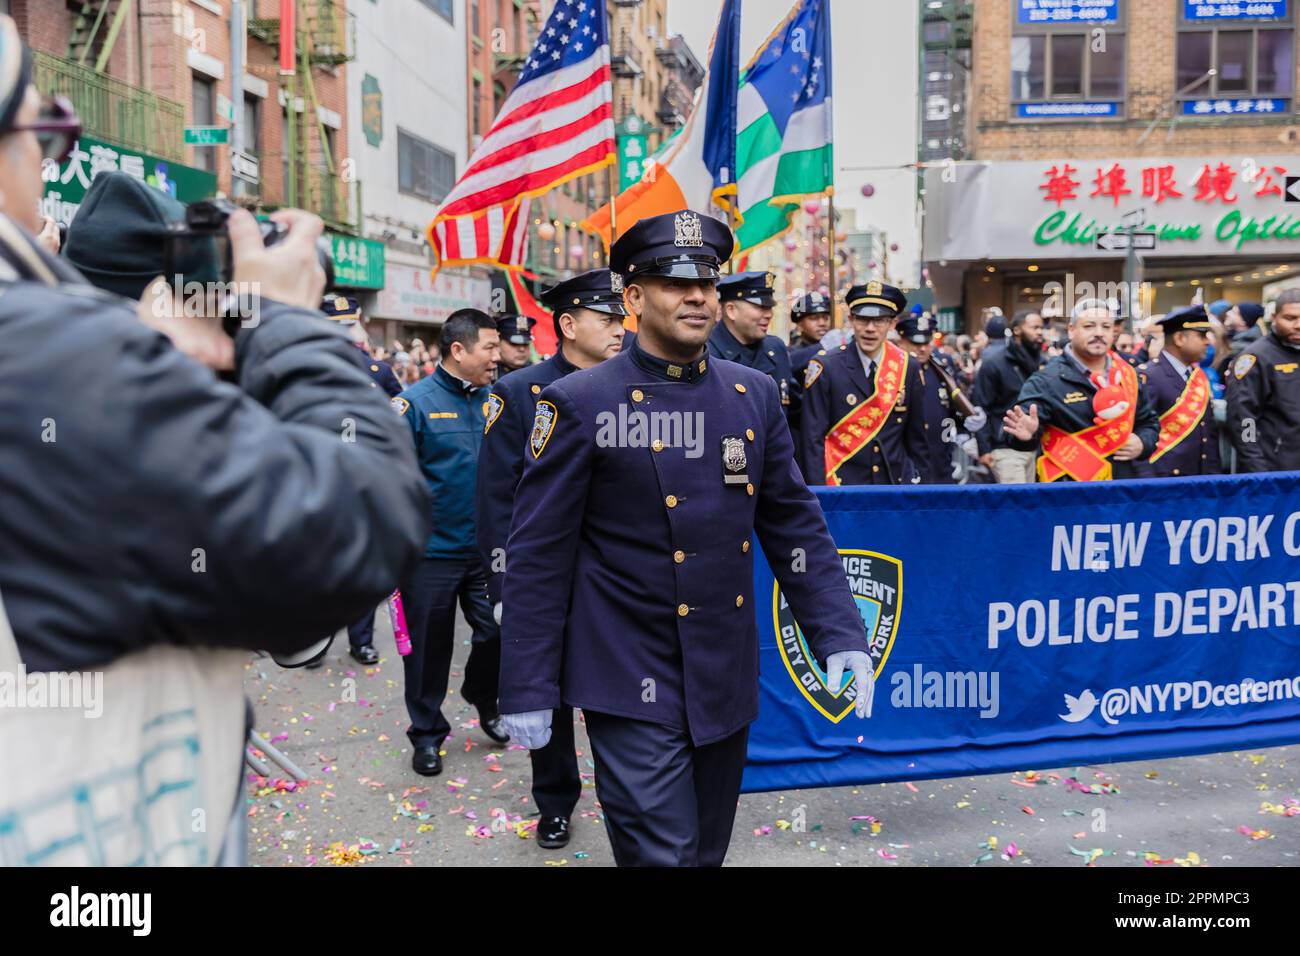 Polizei-Band des New York City Police Department in Chinatown, New York, USA Stockfoto